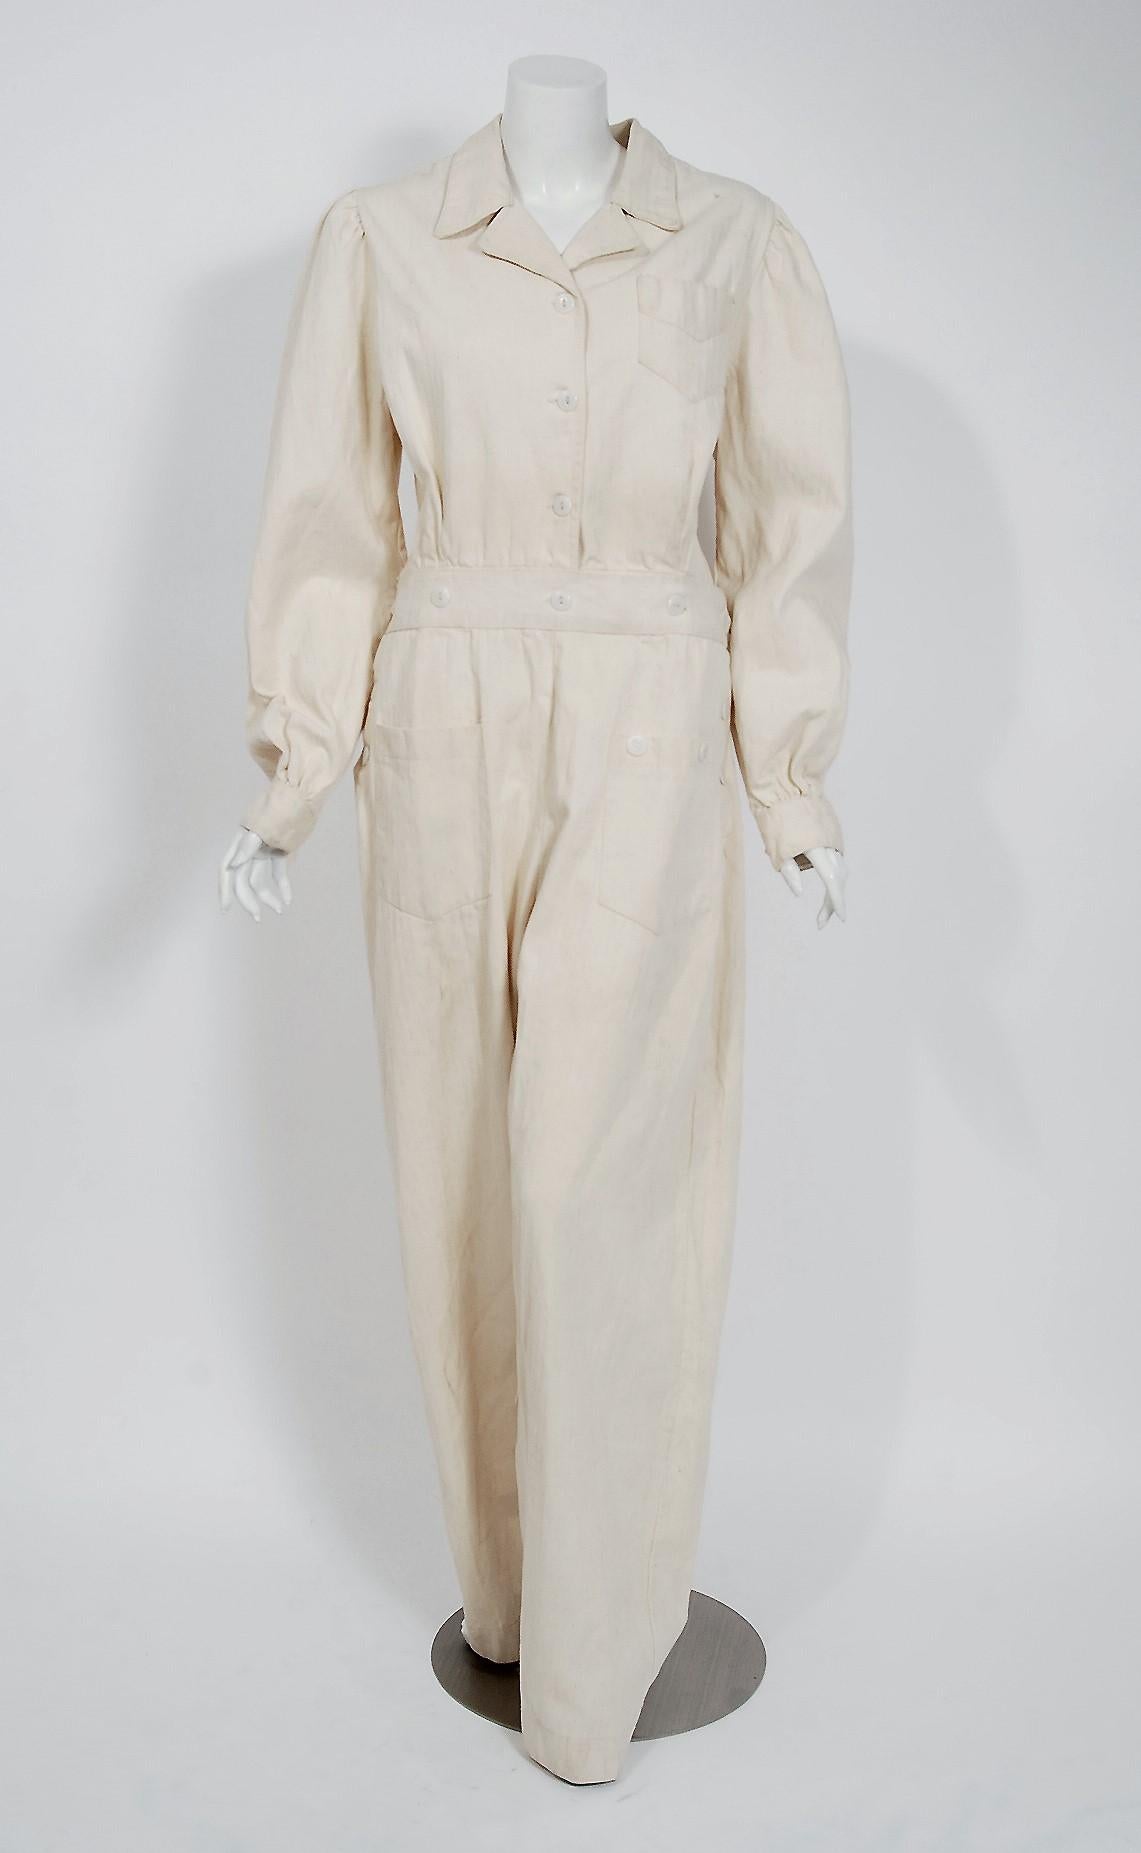 Ultra rare 1940's ecru cotton-twill workwear jumpsuit by the American company 